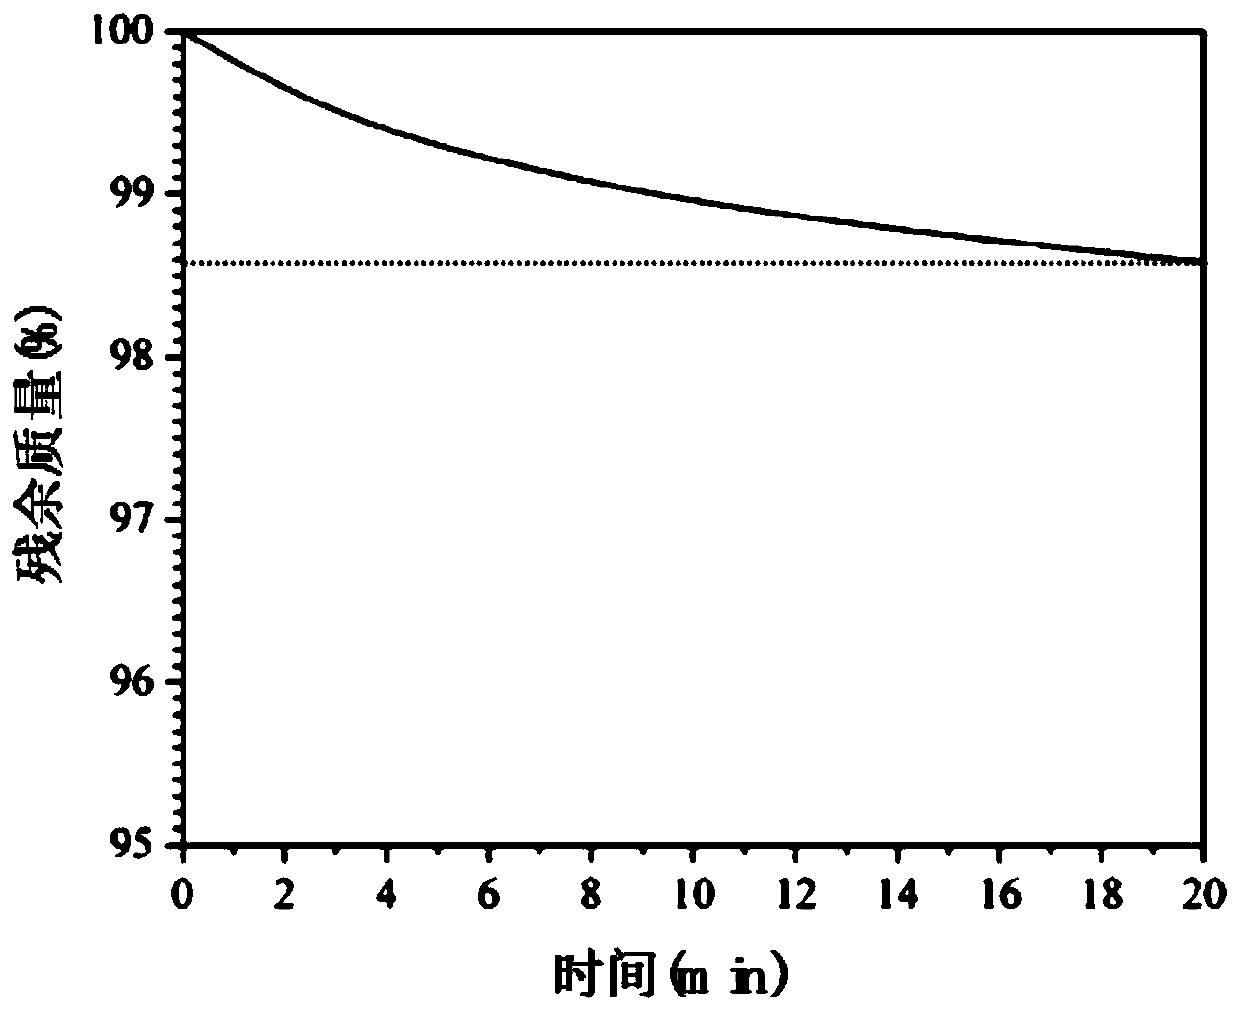 Low-temperature-impact-resistant high-transmittance flame-retardant polycarbonate composite material and preparation method thereof